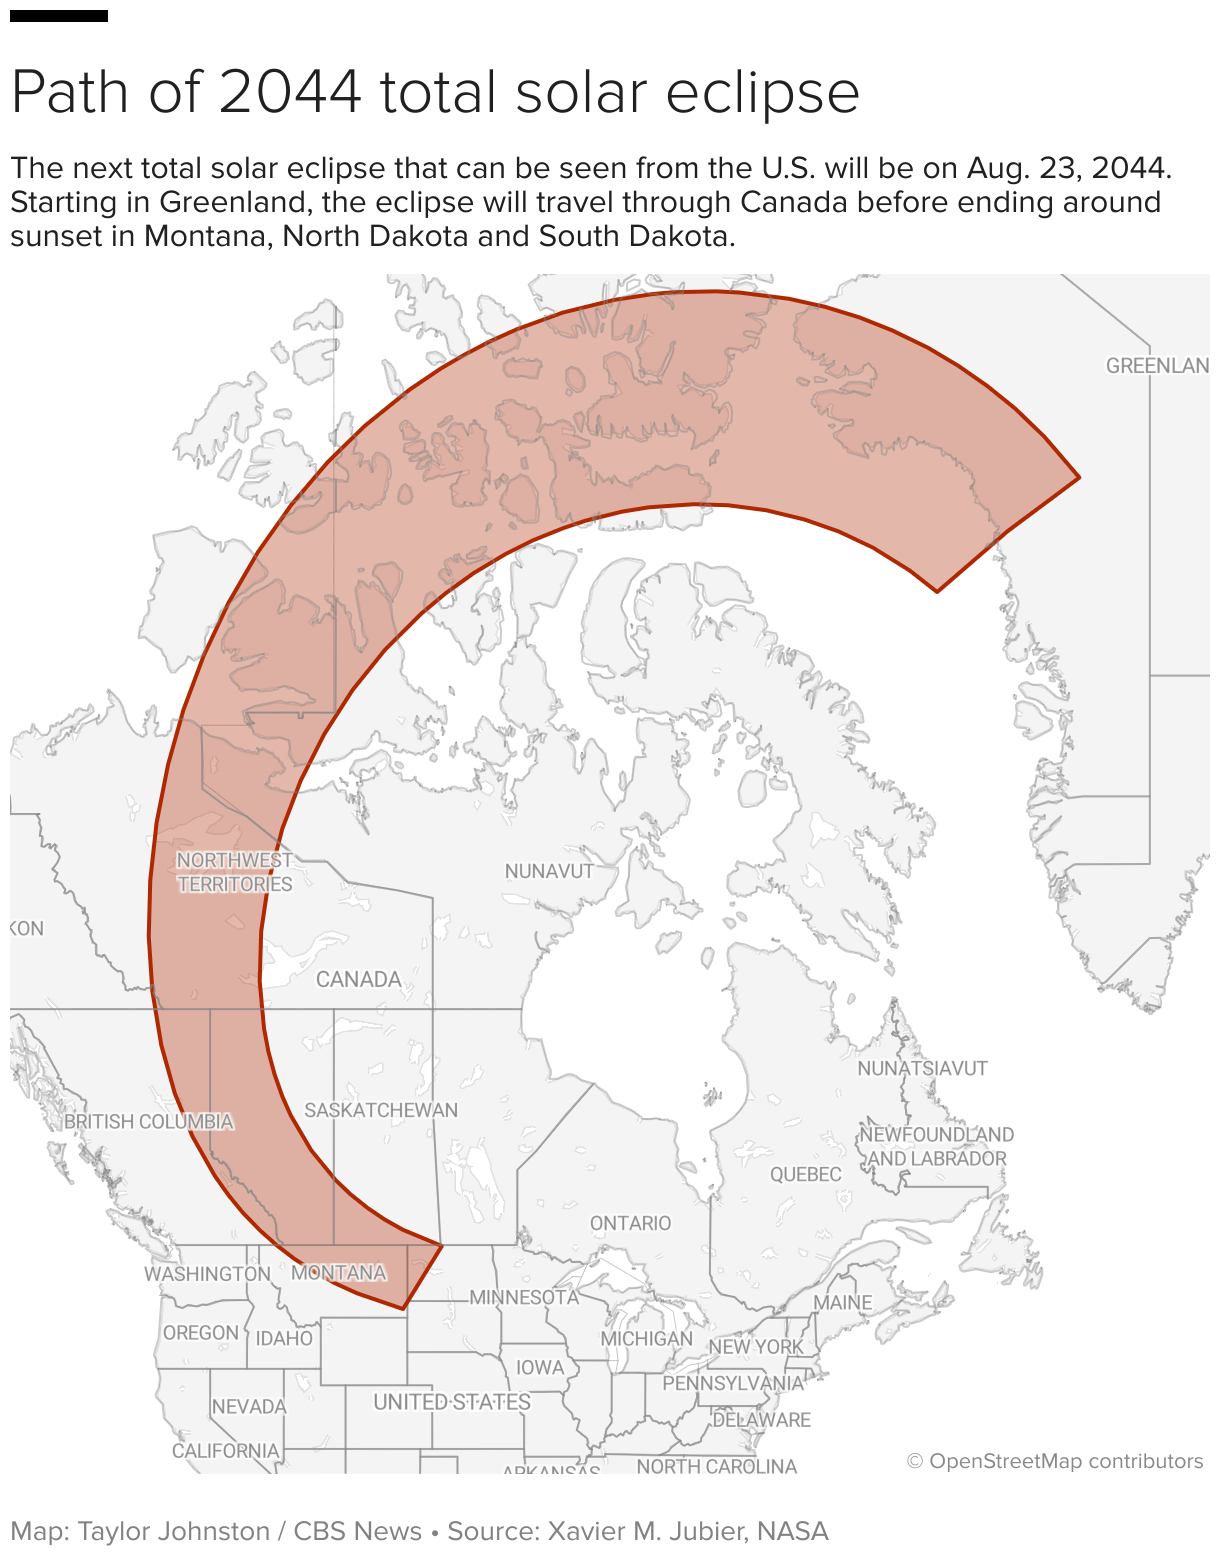 Map showing the path of the 2044 total solar eclipse from Greenland, Canada and parts of the United States.